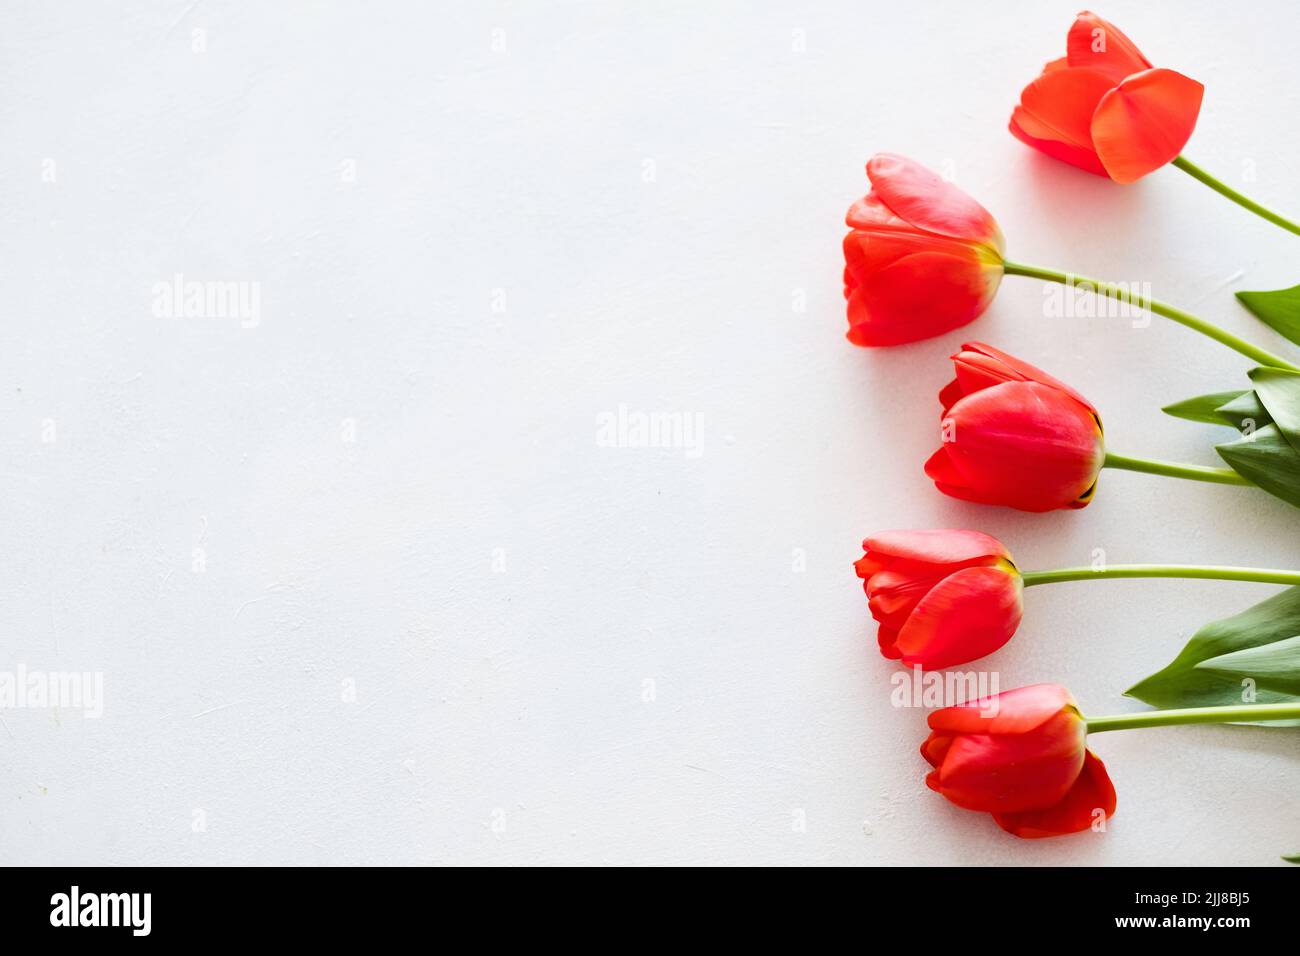 red tulips white background floral composition Stock Photo